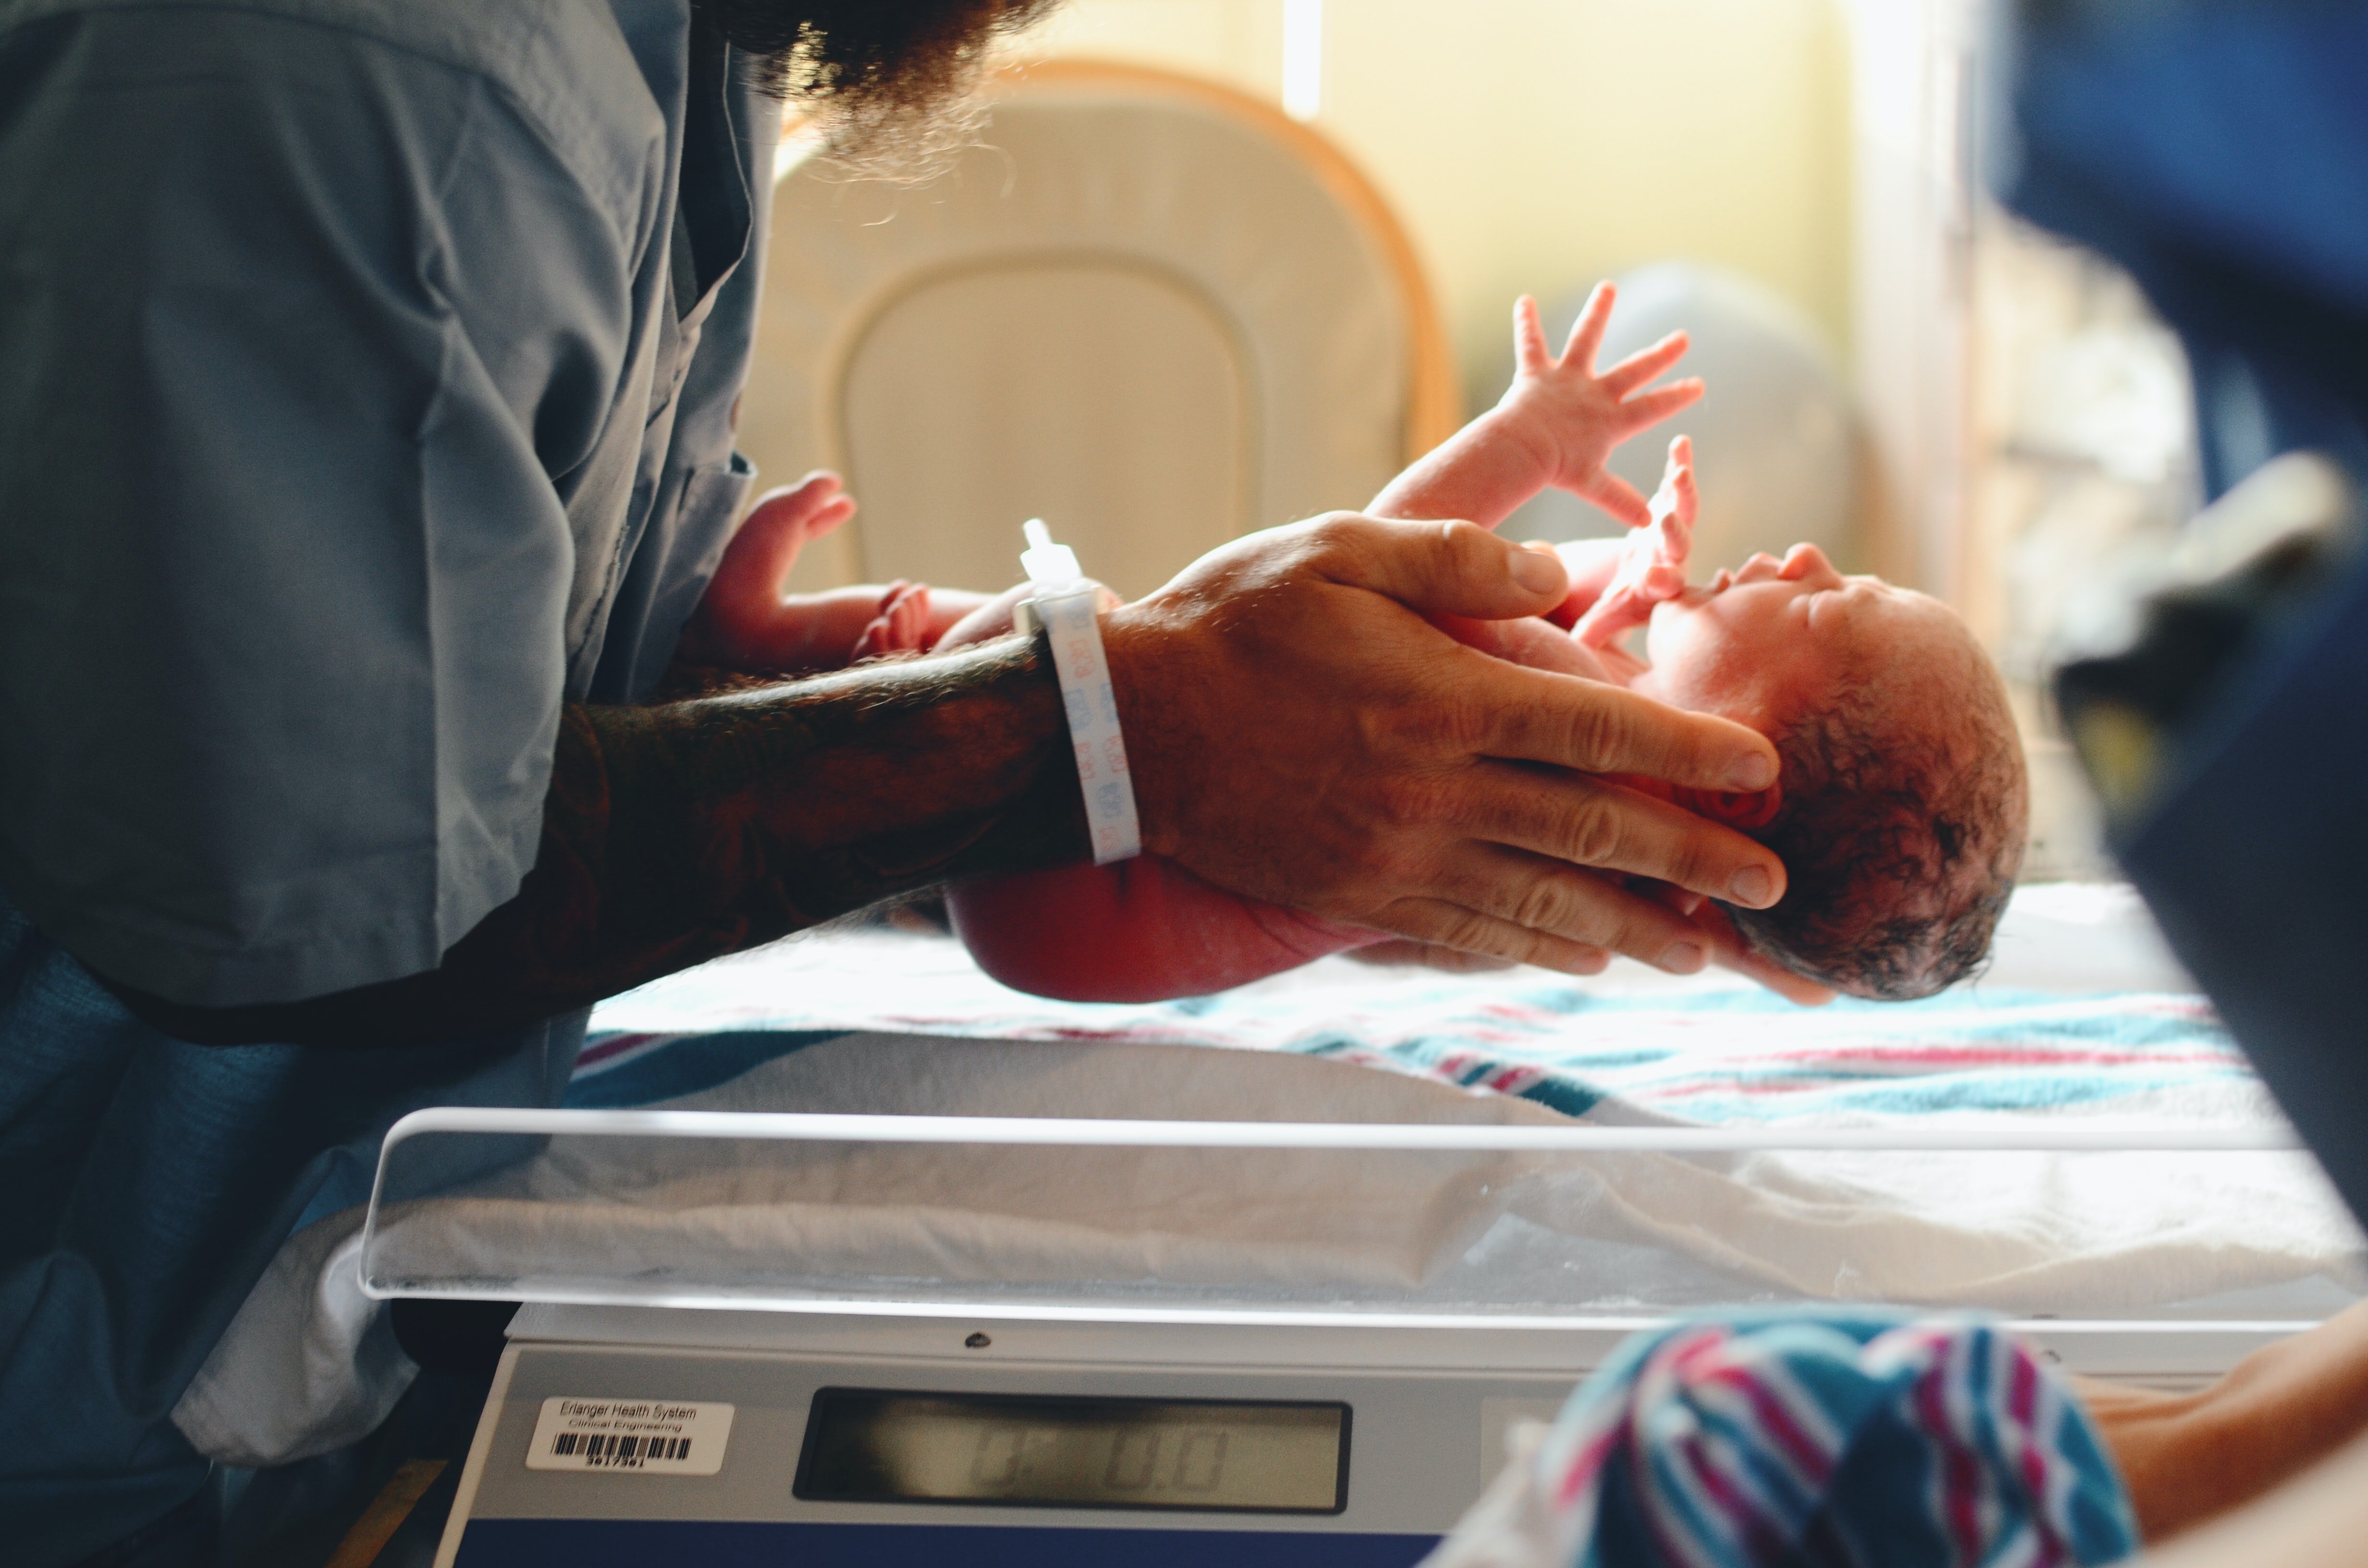 Dr. Carter informed Silvia that her baby was placed in the NICU | Photo: Unsplash